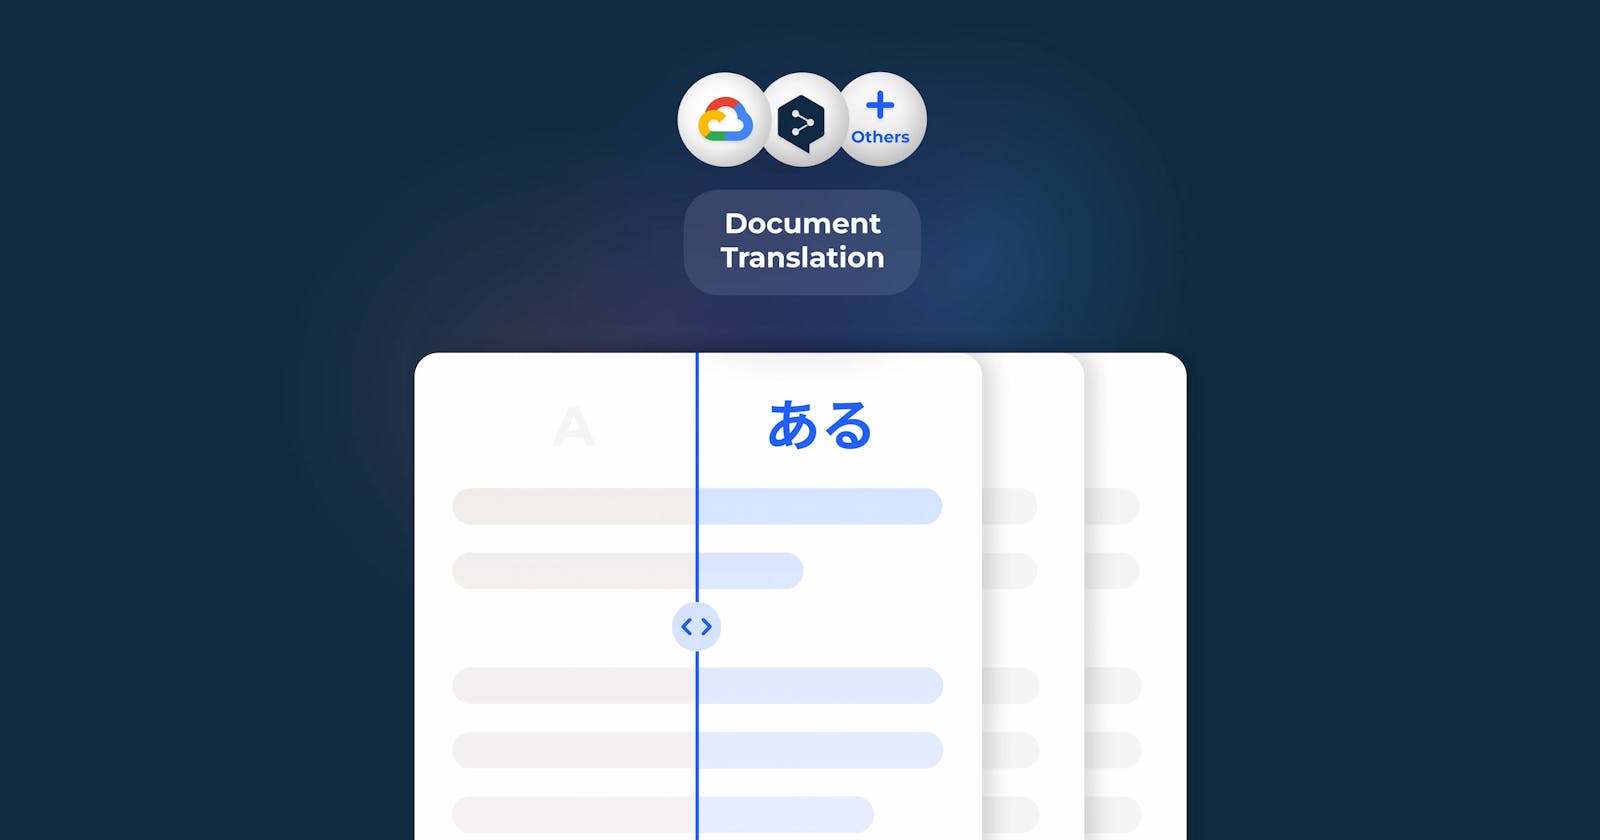 How to translate a document with JavaScript?